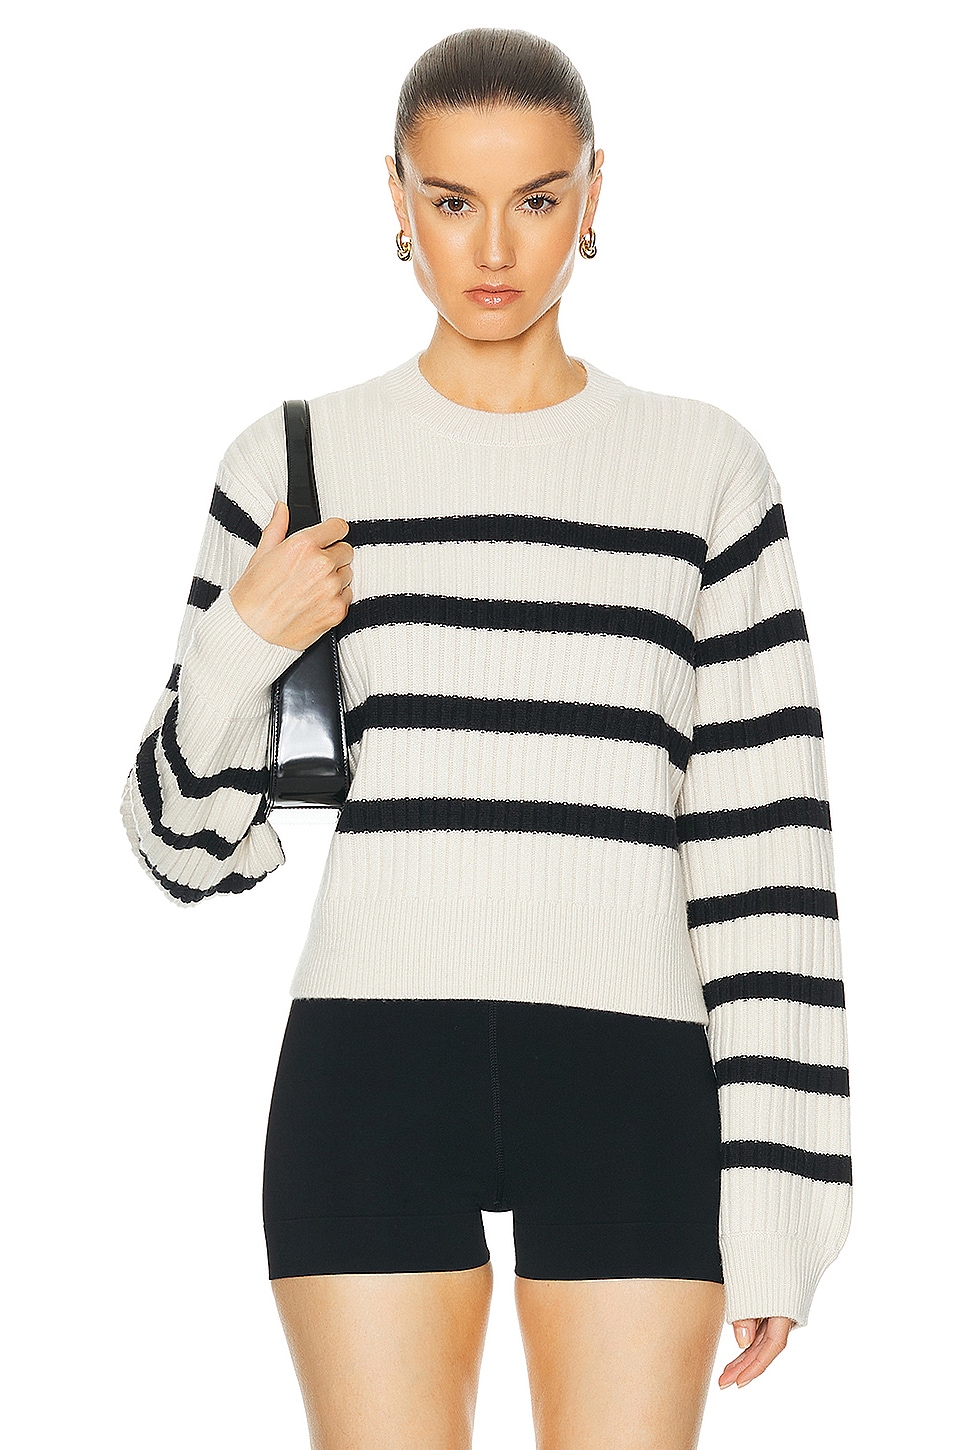 Image 1 of L'Academie by Marianna Brial Striped Sweater in Cream & Black